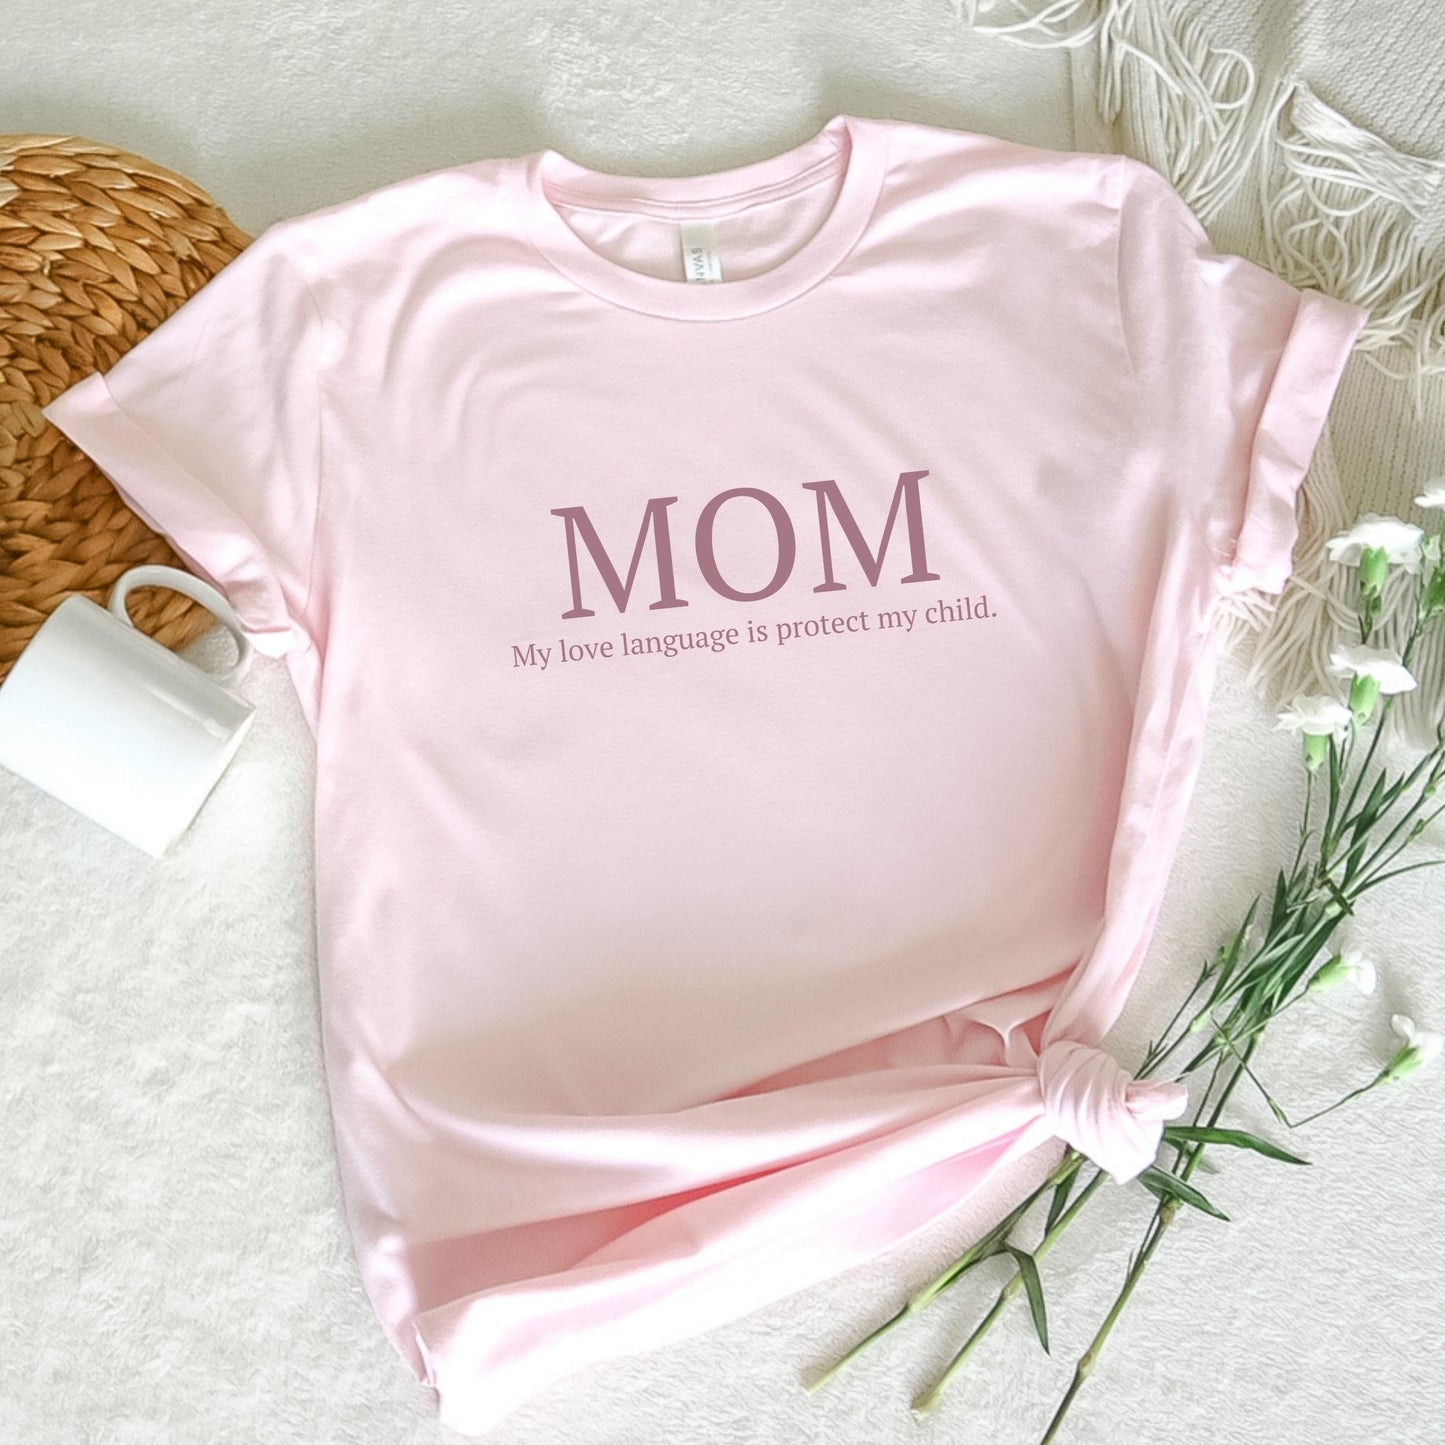 Mom's Protect T-Shirt